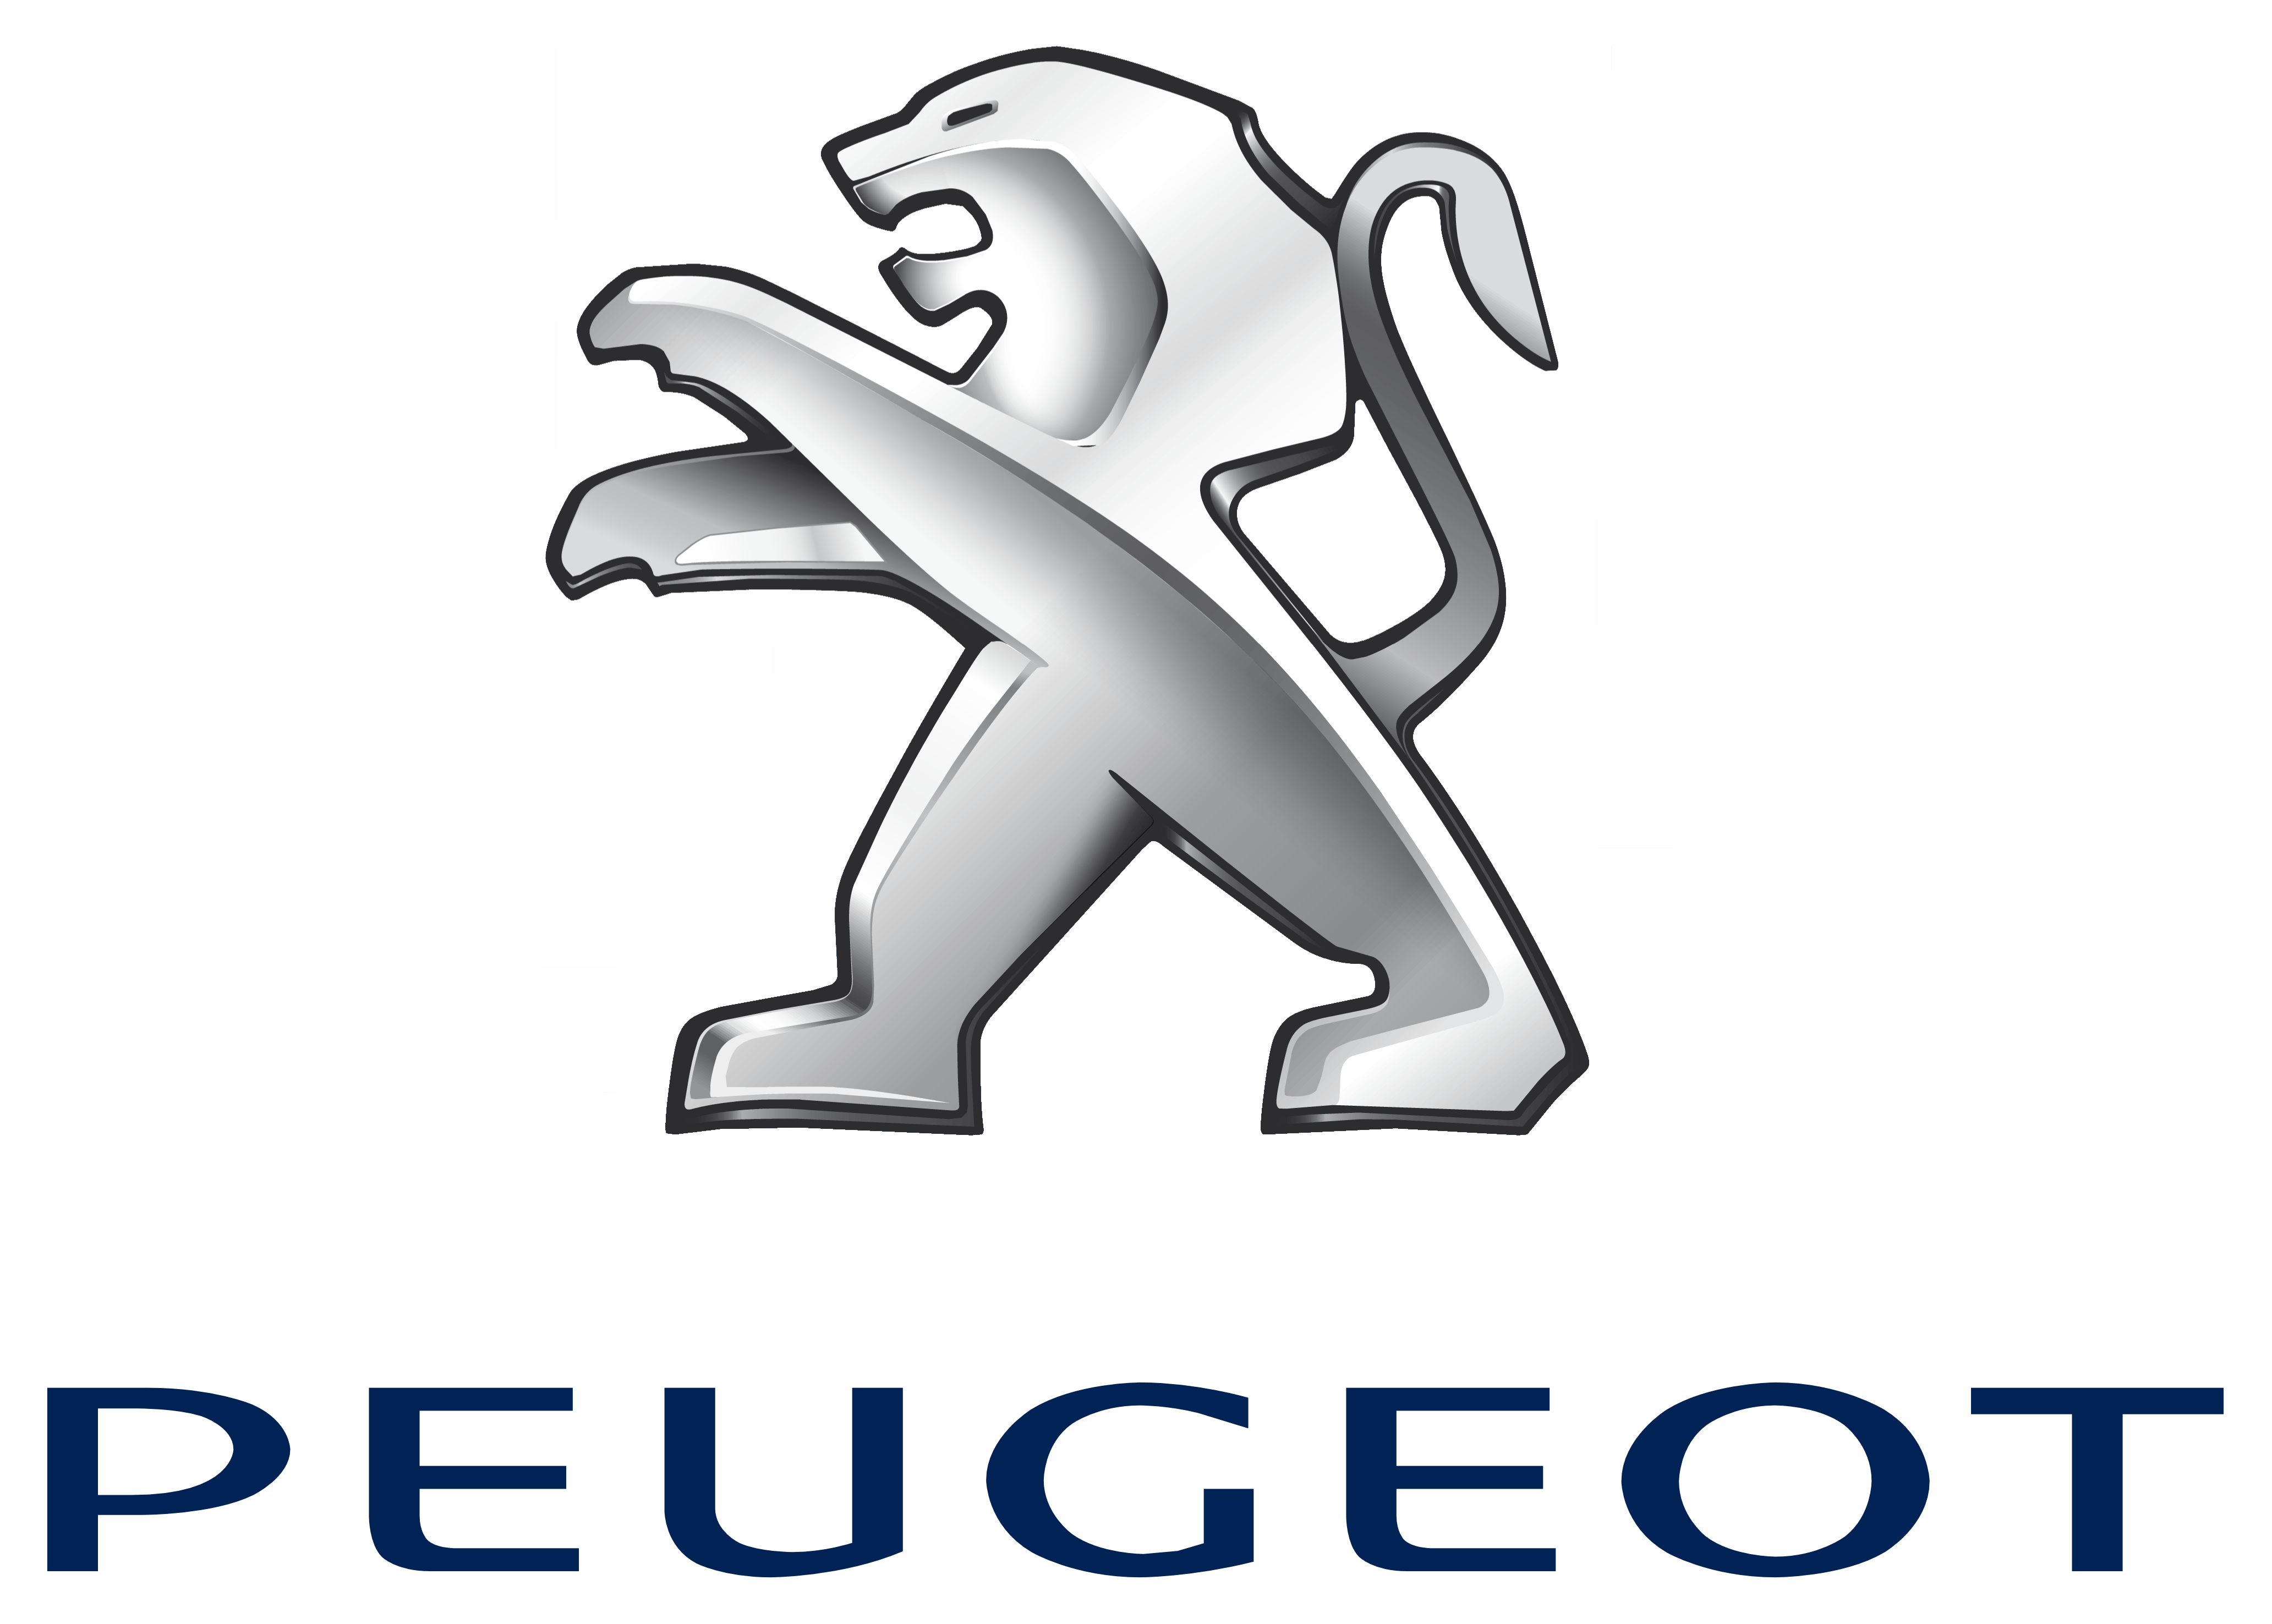 Car Company with Lion Logo - Peugeot Logo, Peugeot Car Symbol Meaning and History. Car Brand